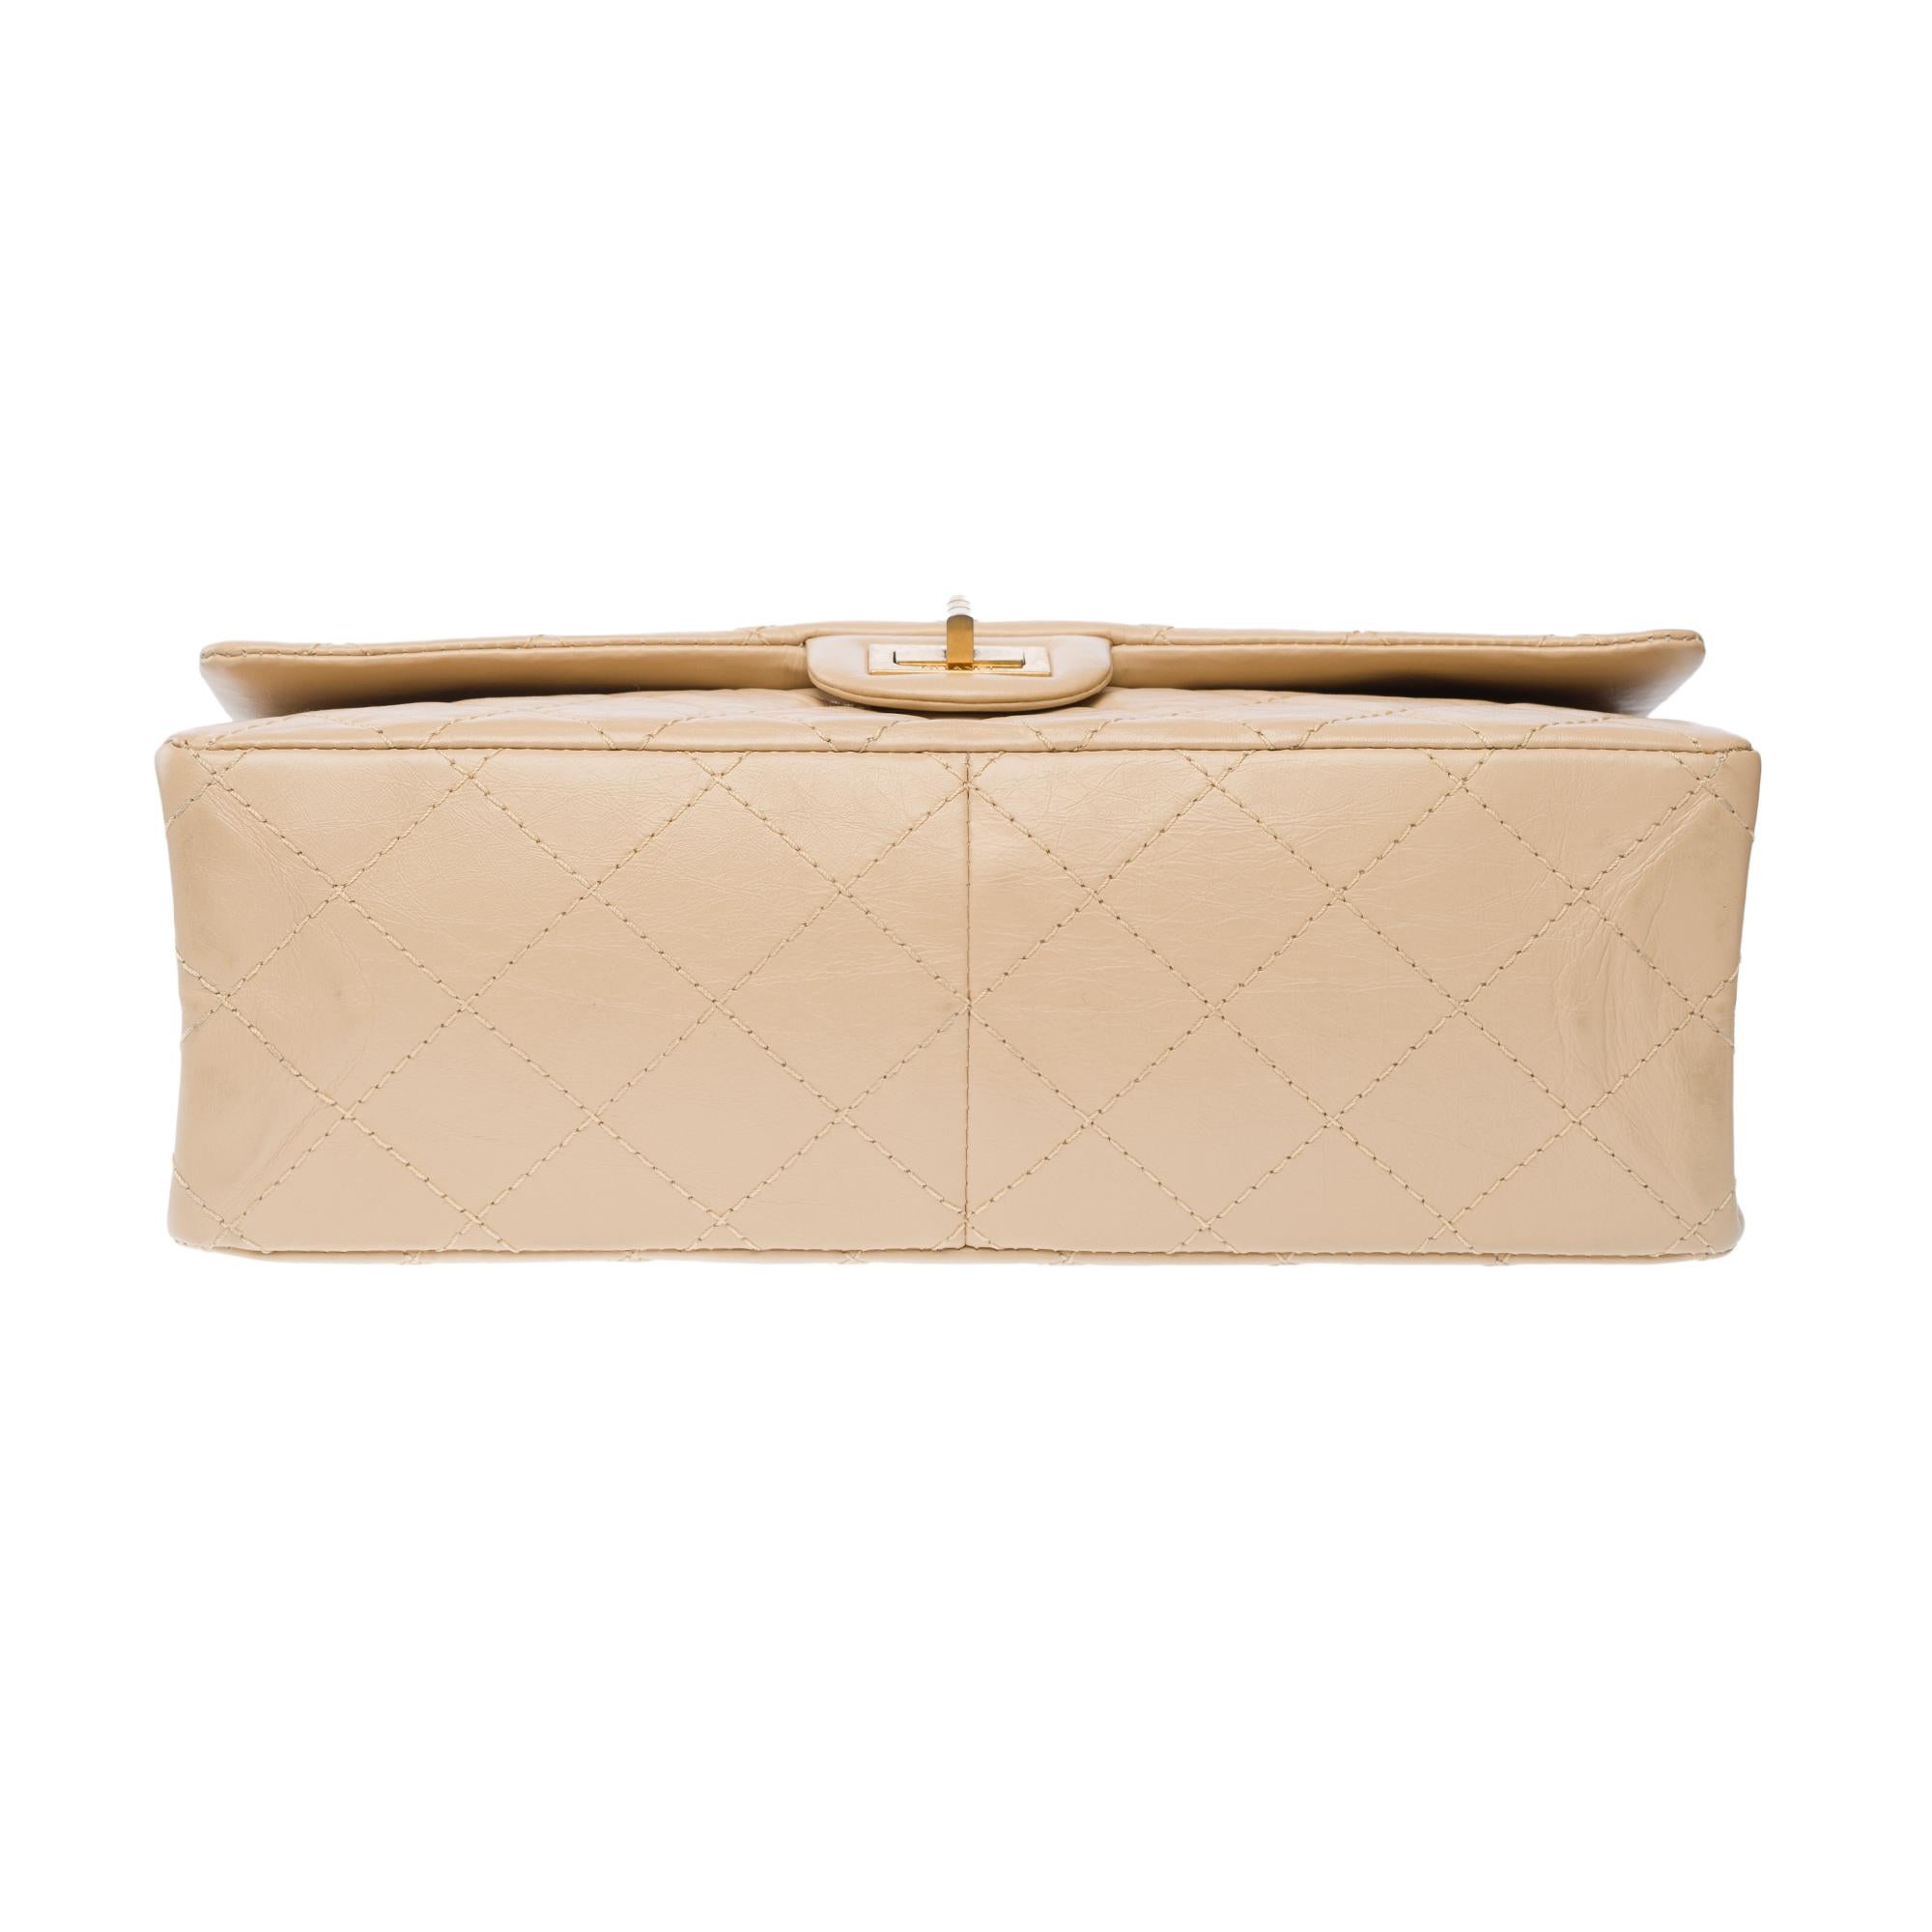 Iconic Chanel 2.55 double flap shoulder bag in quilted beige leather, GHW For Sale 8